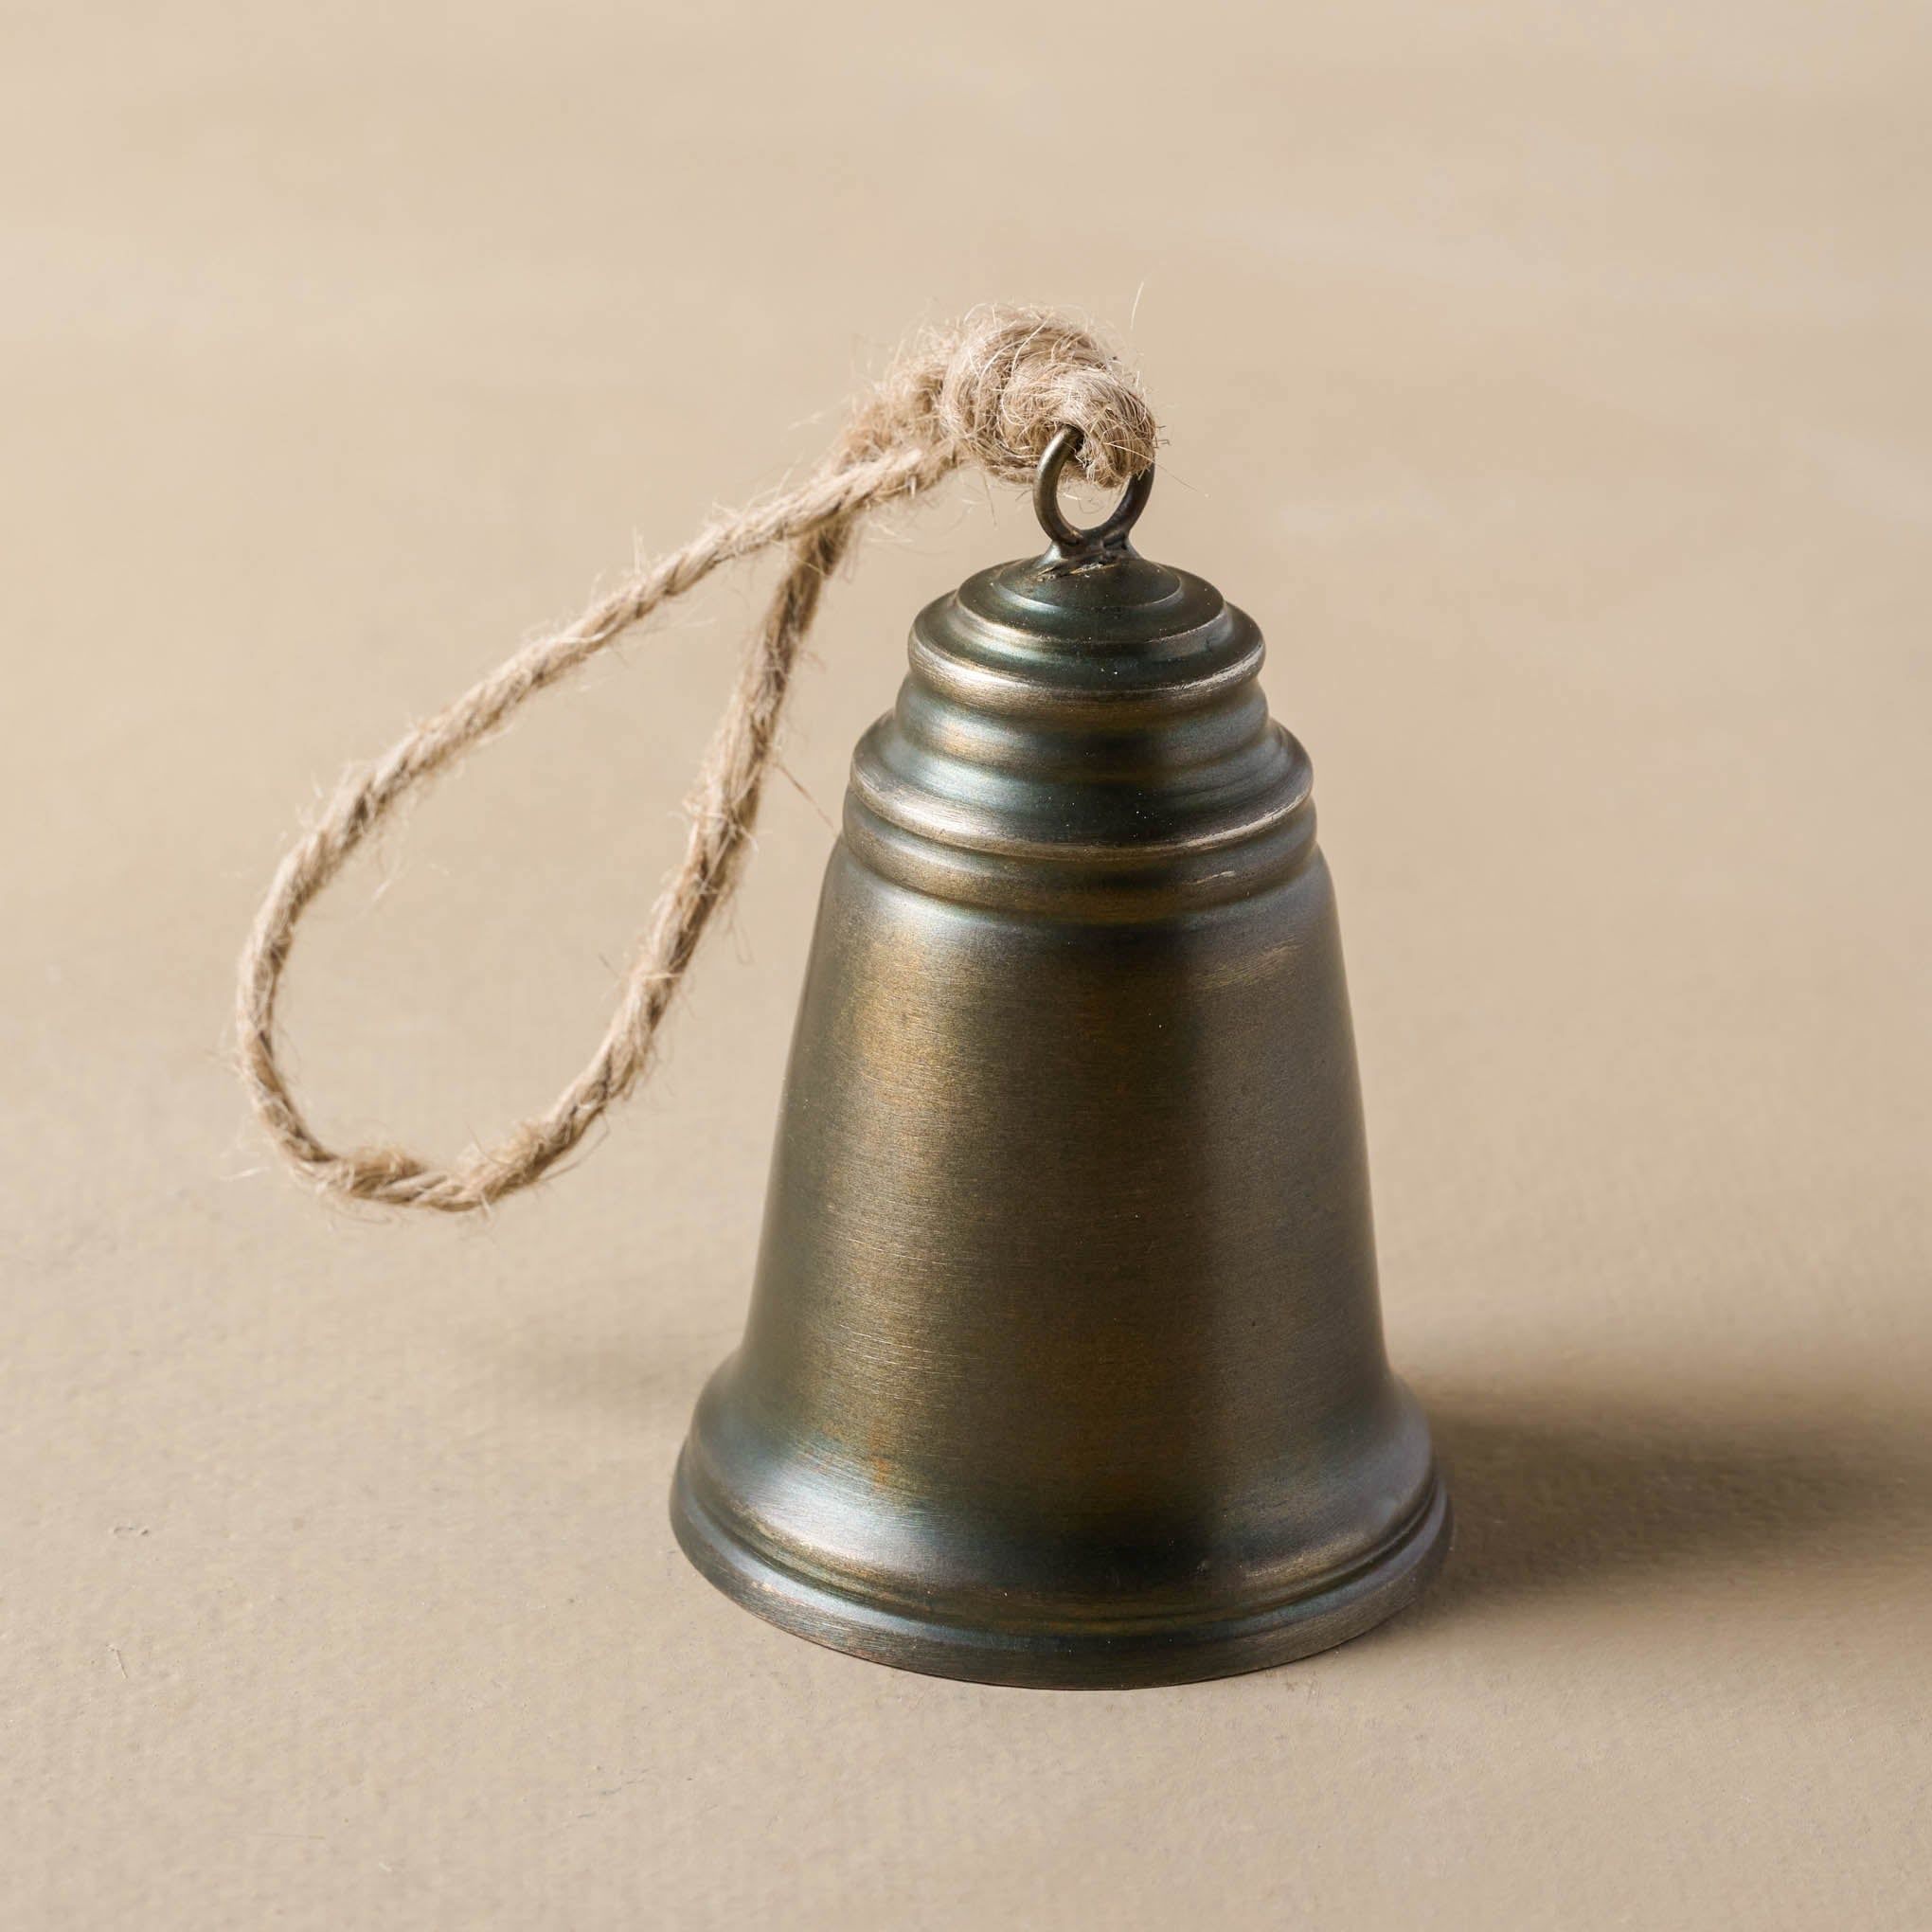 Antiqued Brass Bell Ornament | Magnolia